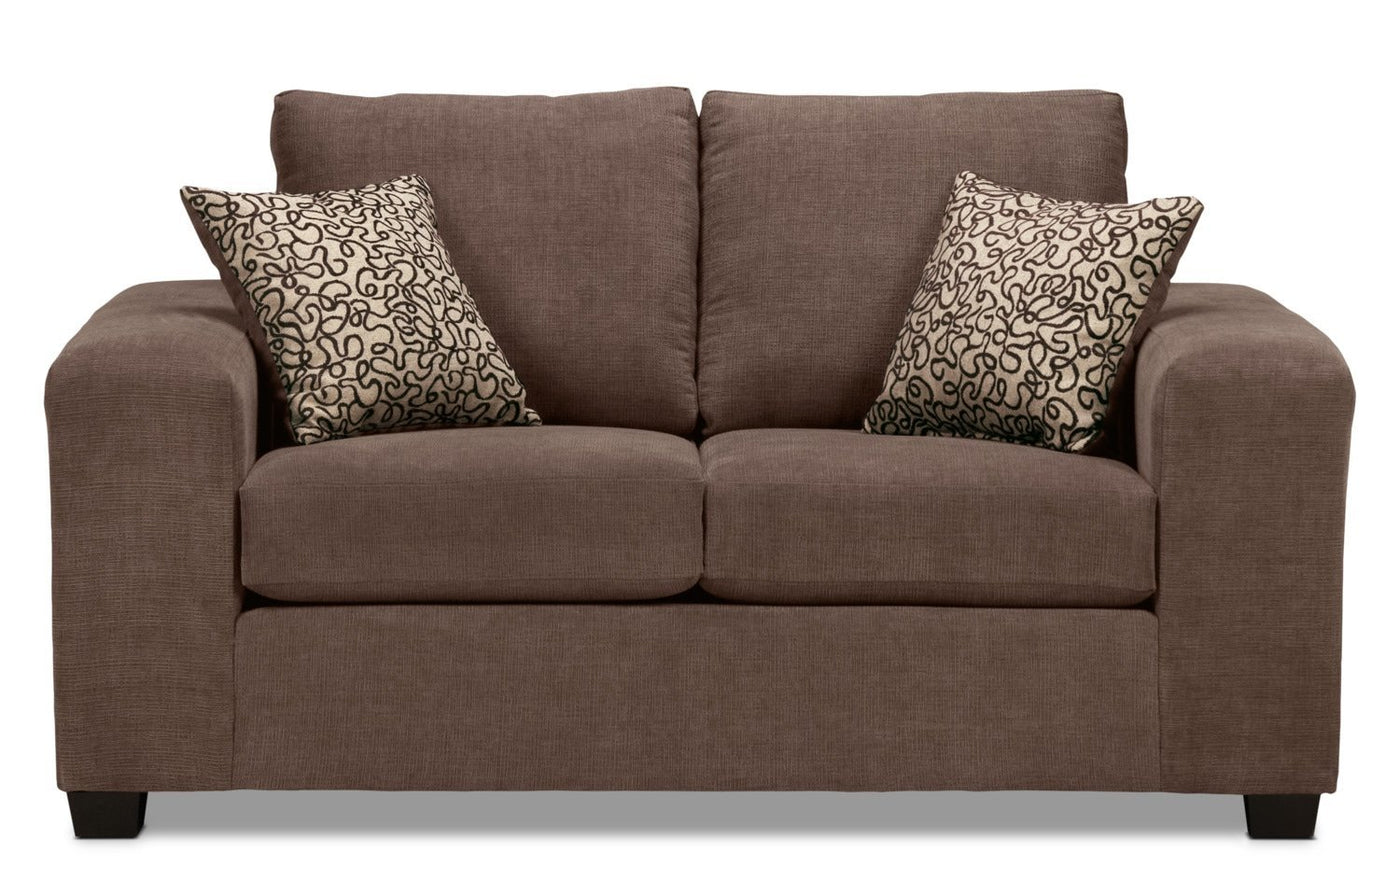 Fava Sofa, Loveseat and Chair Set - Light Brown